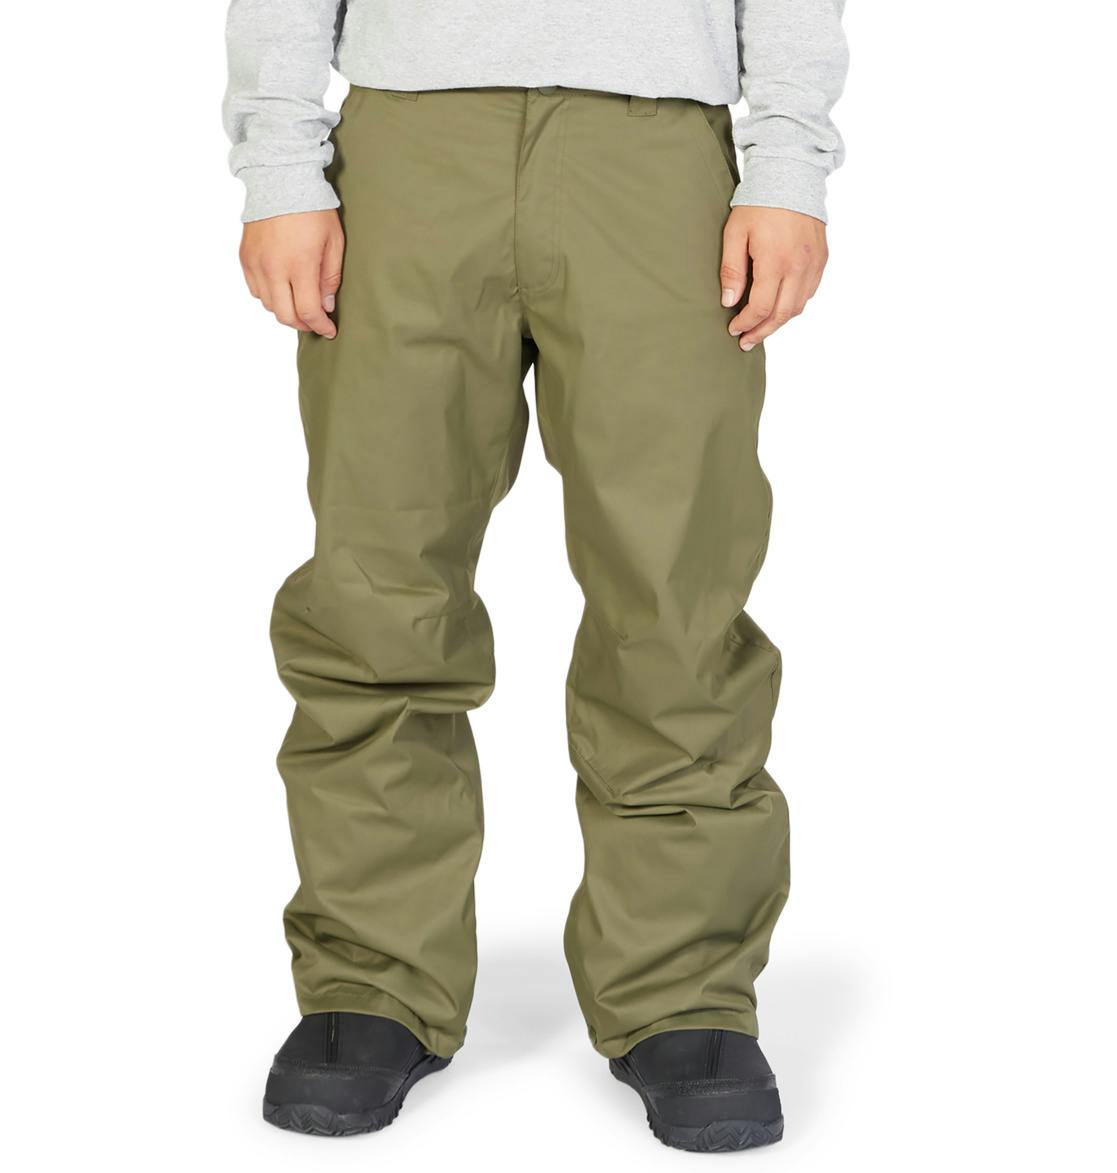 DC Men's Snow Chino Insulated Pants